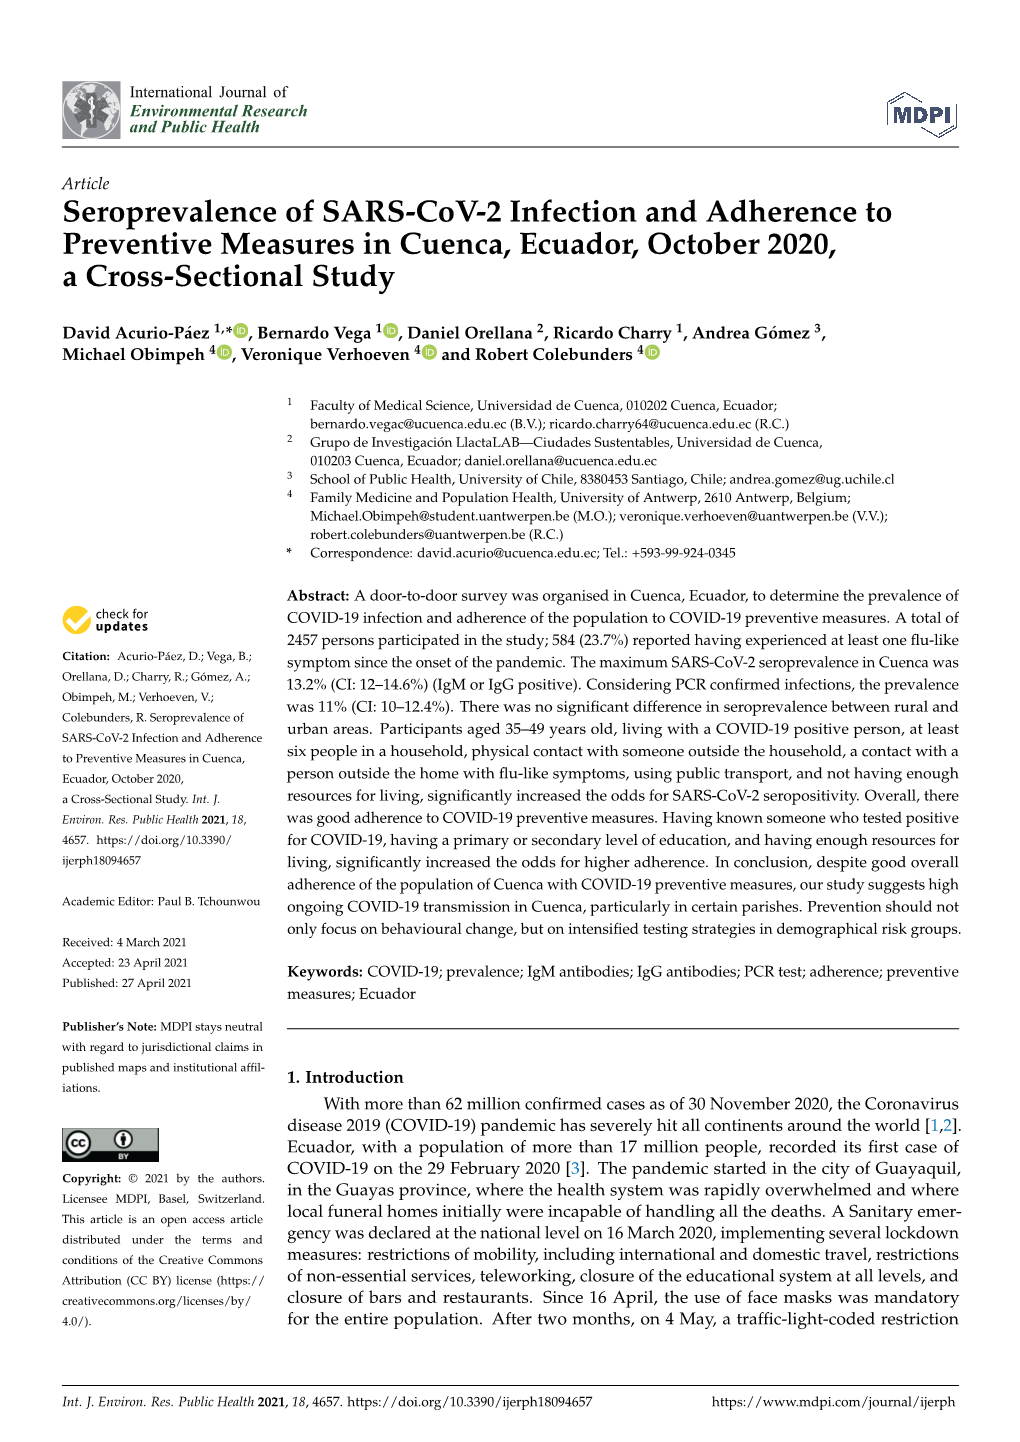 Seroprevalence of SARS-Cov-2 Infection and Adherence to Preventive Measures in Cuenca, Ecuador, October 2020, a Cross-Sectional Study